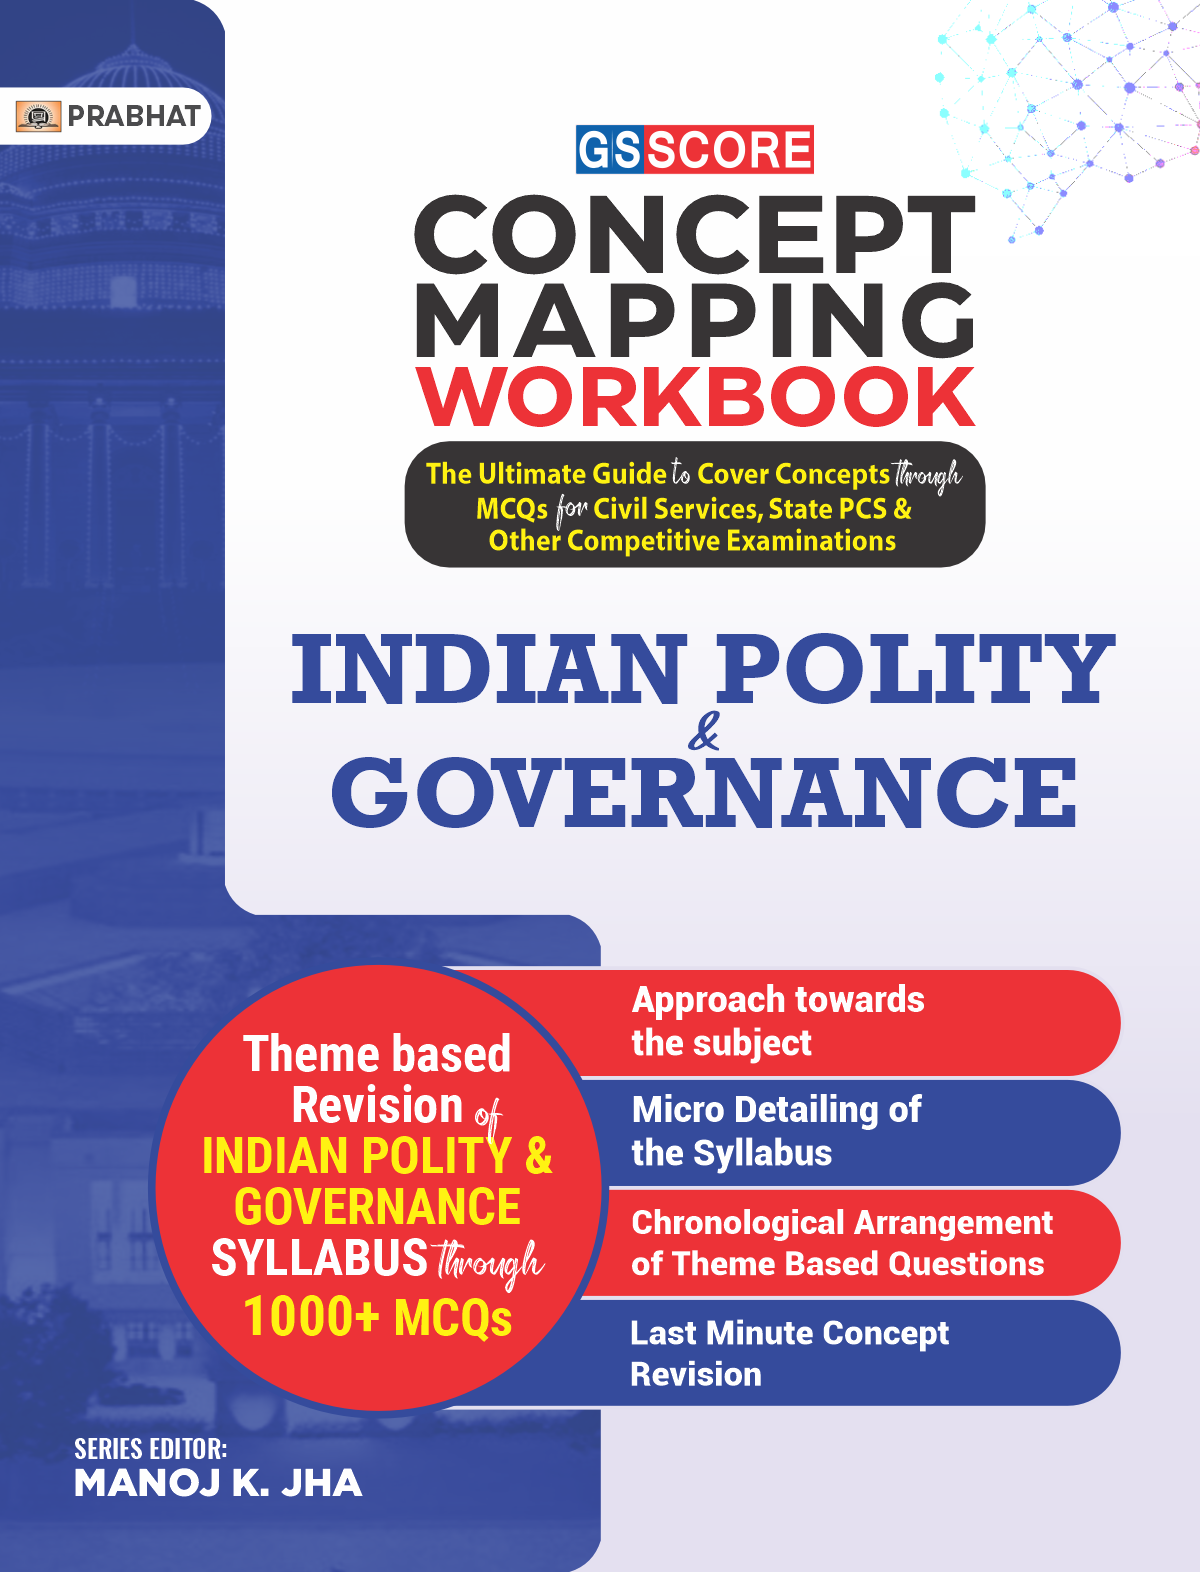 GS SCORE Concept Mapping Workbook Indian Polity & Governance